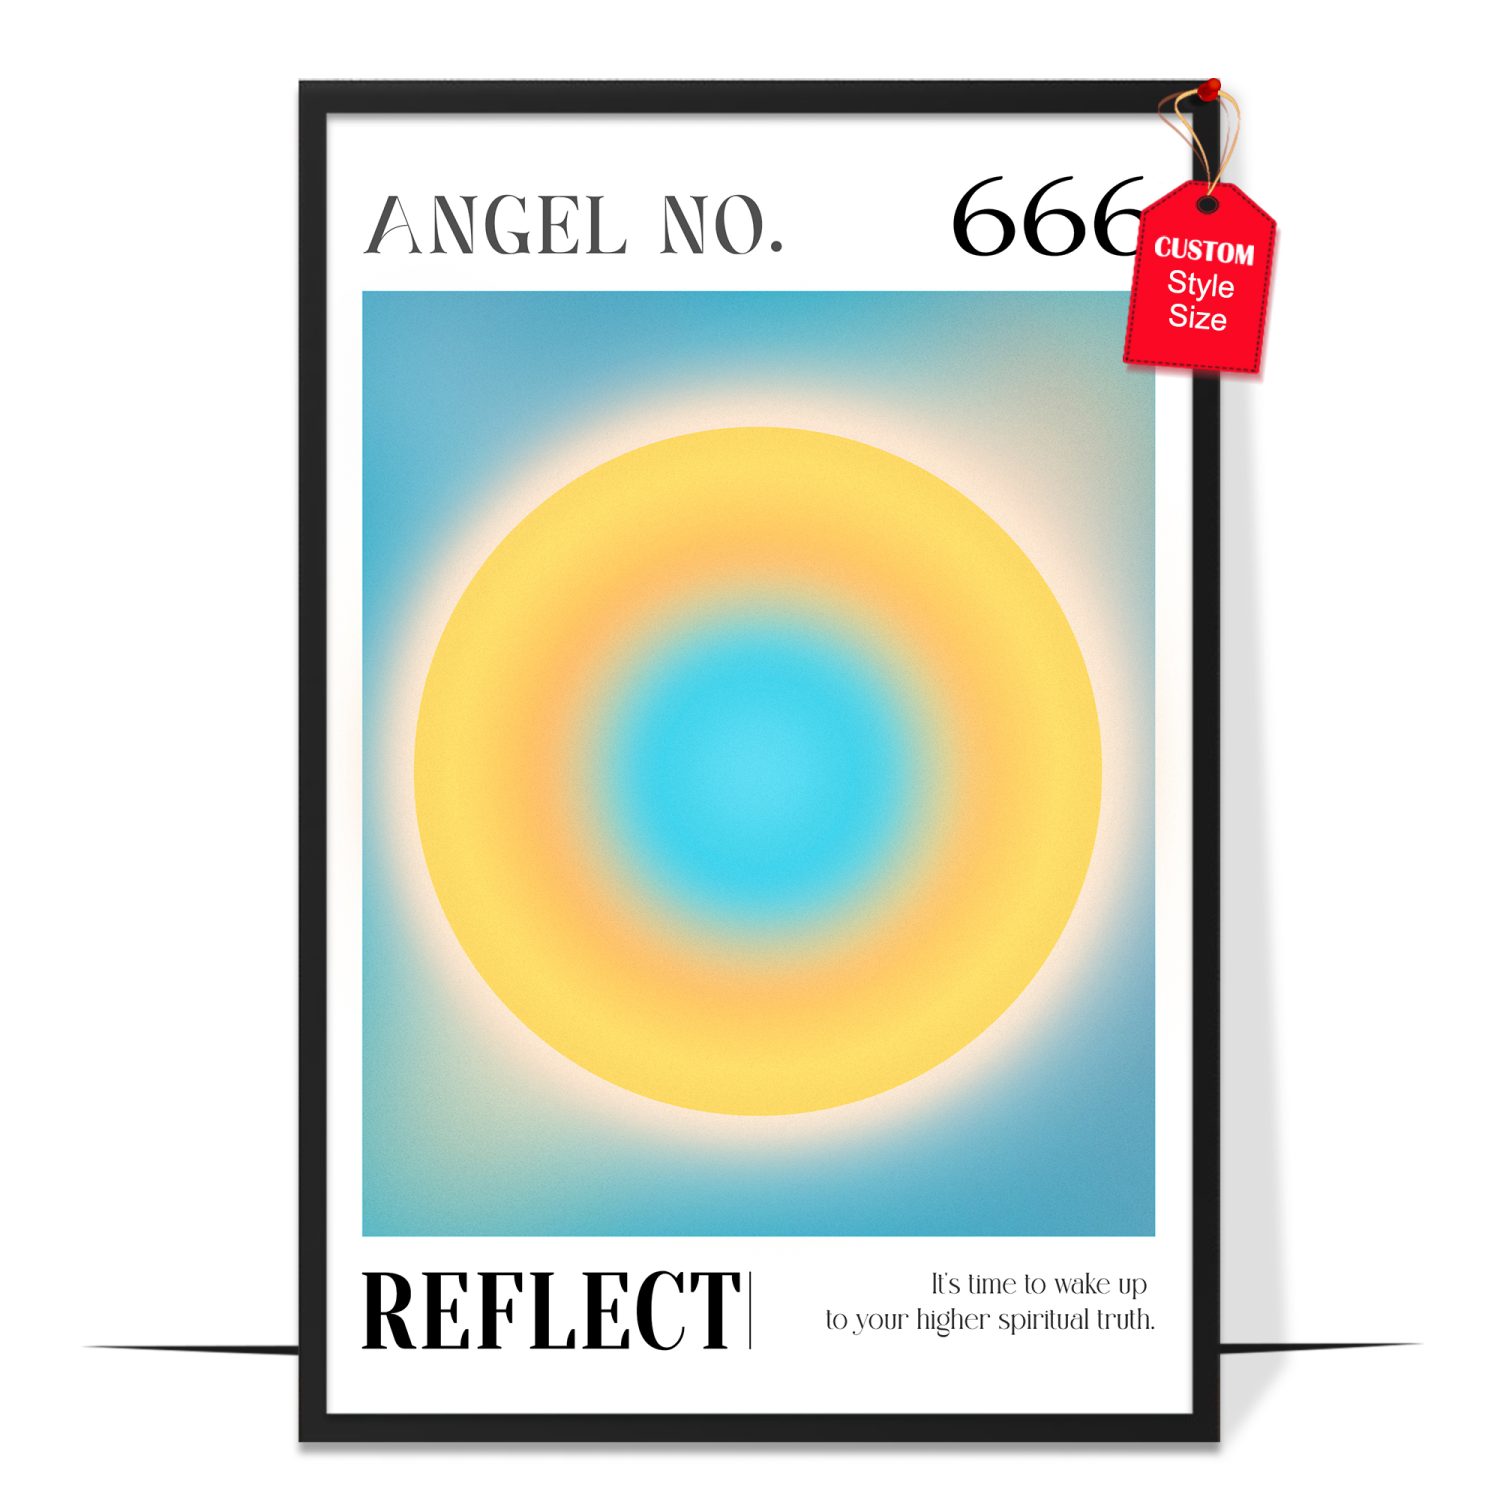 666 Reflect Poster